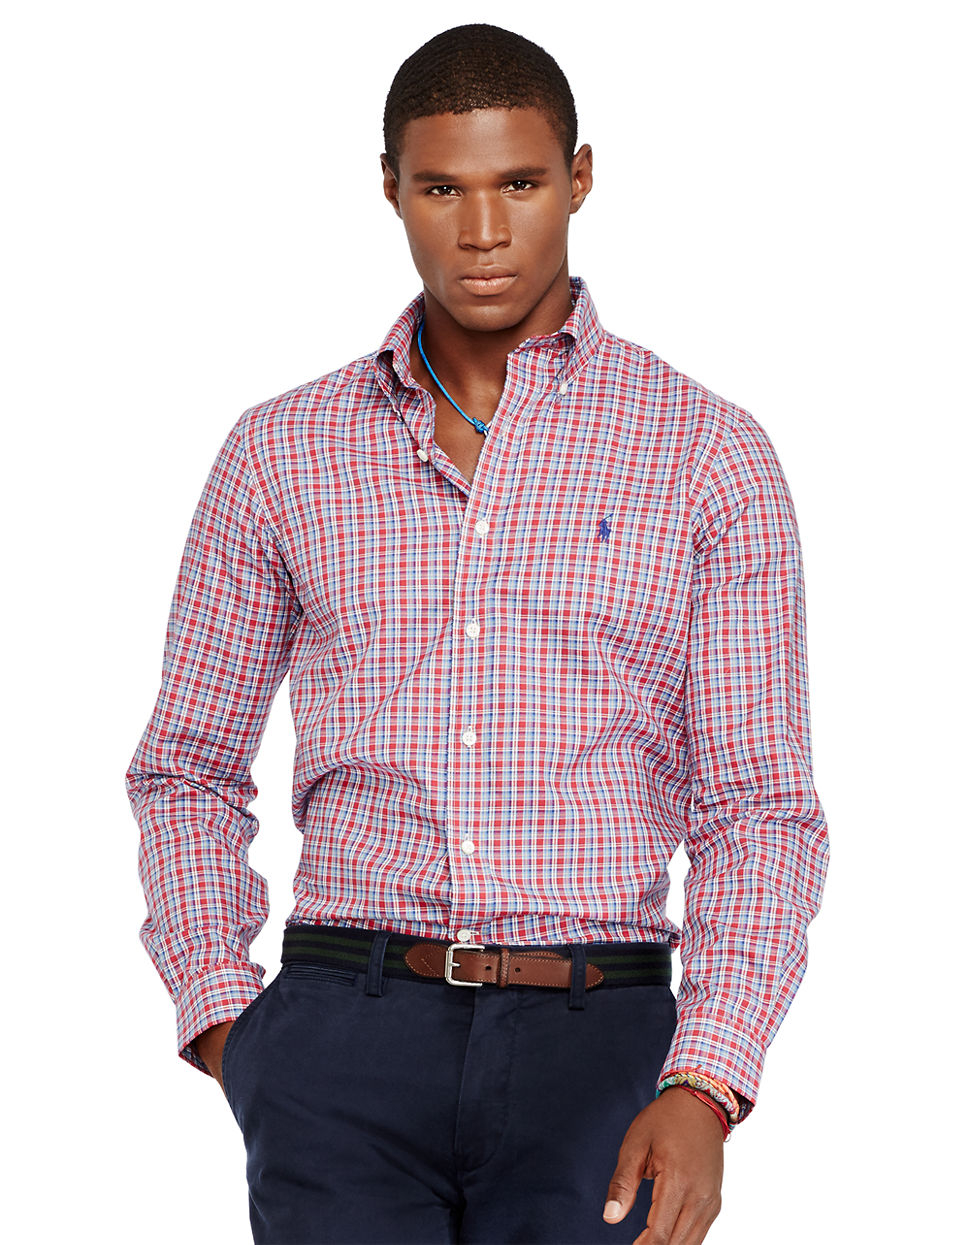 Polo Ralph Lauren Plaid Oxford Shirt in Red for Men - Lyst